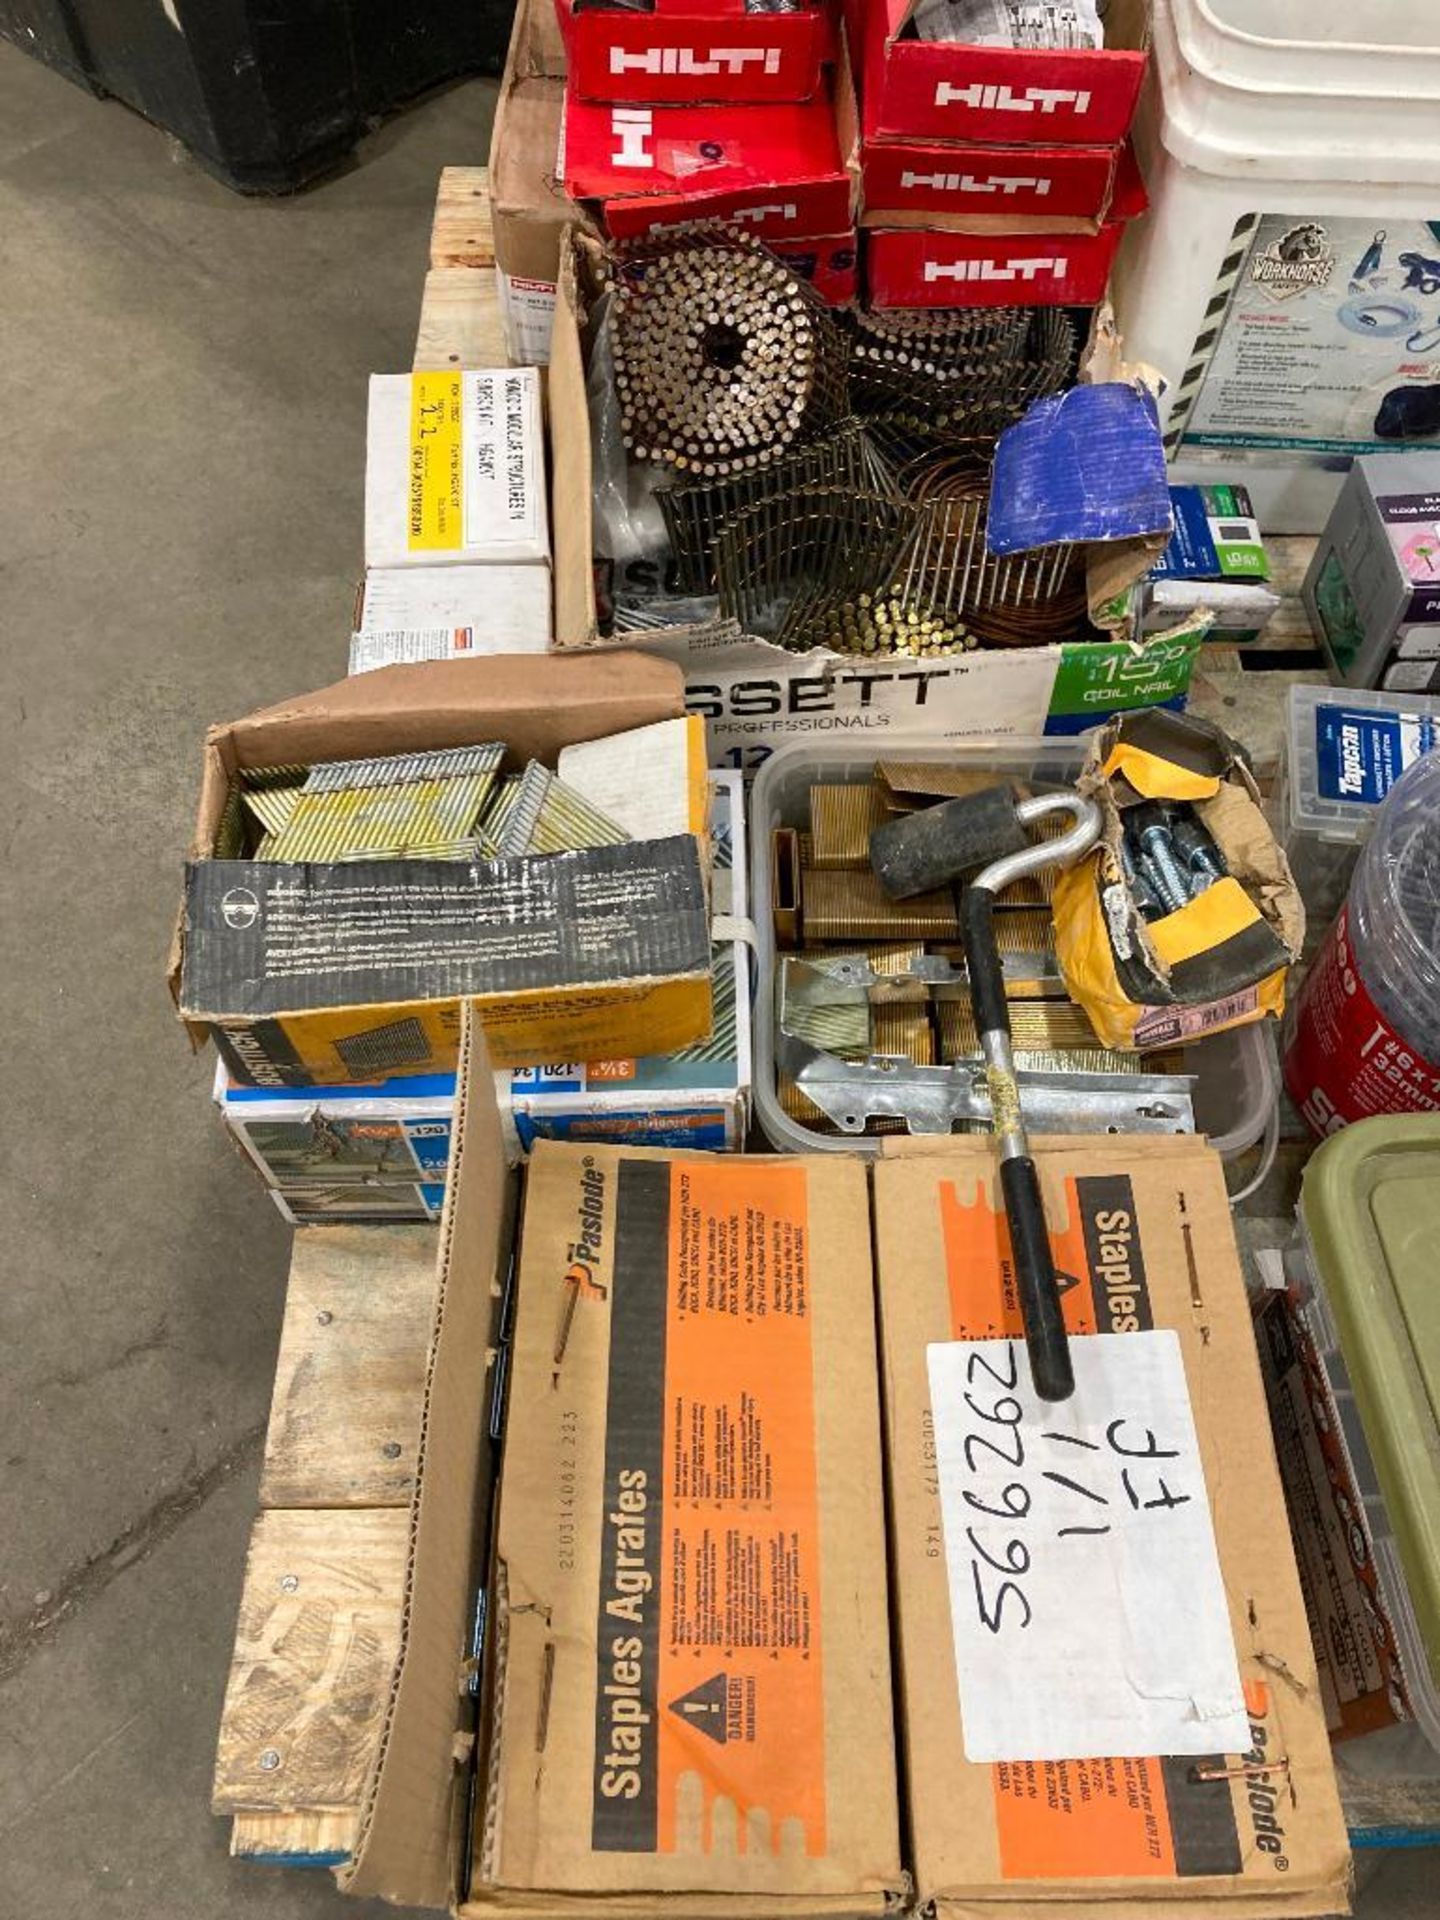 Pallet of Asst. Fasteners including Nails, Screws, Anchors, etc. - Image 4 of 5